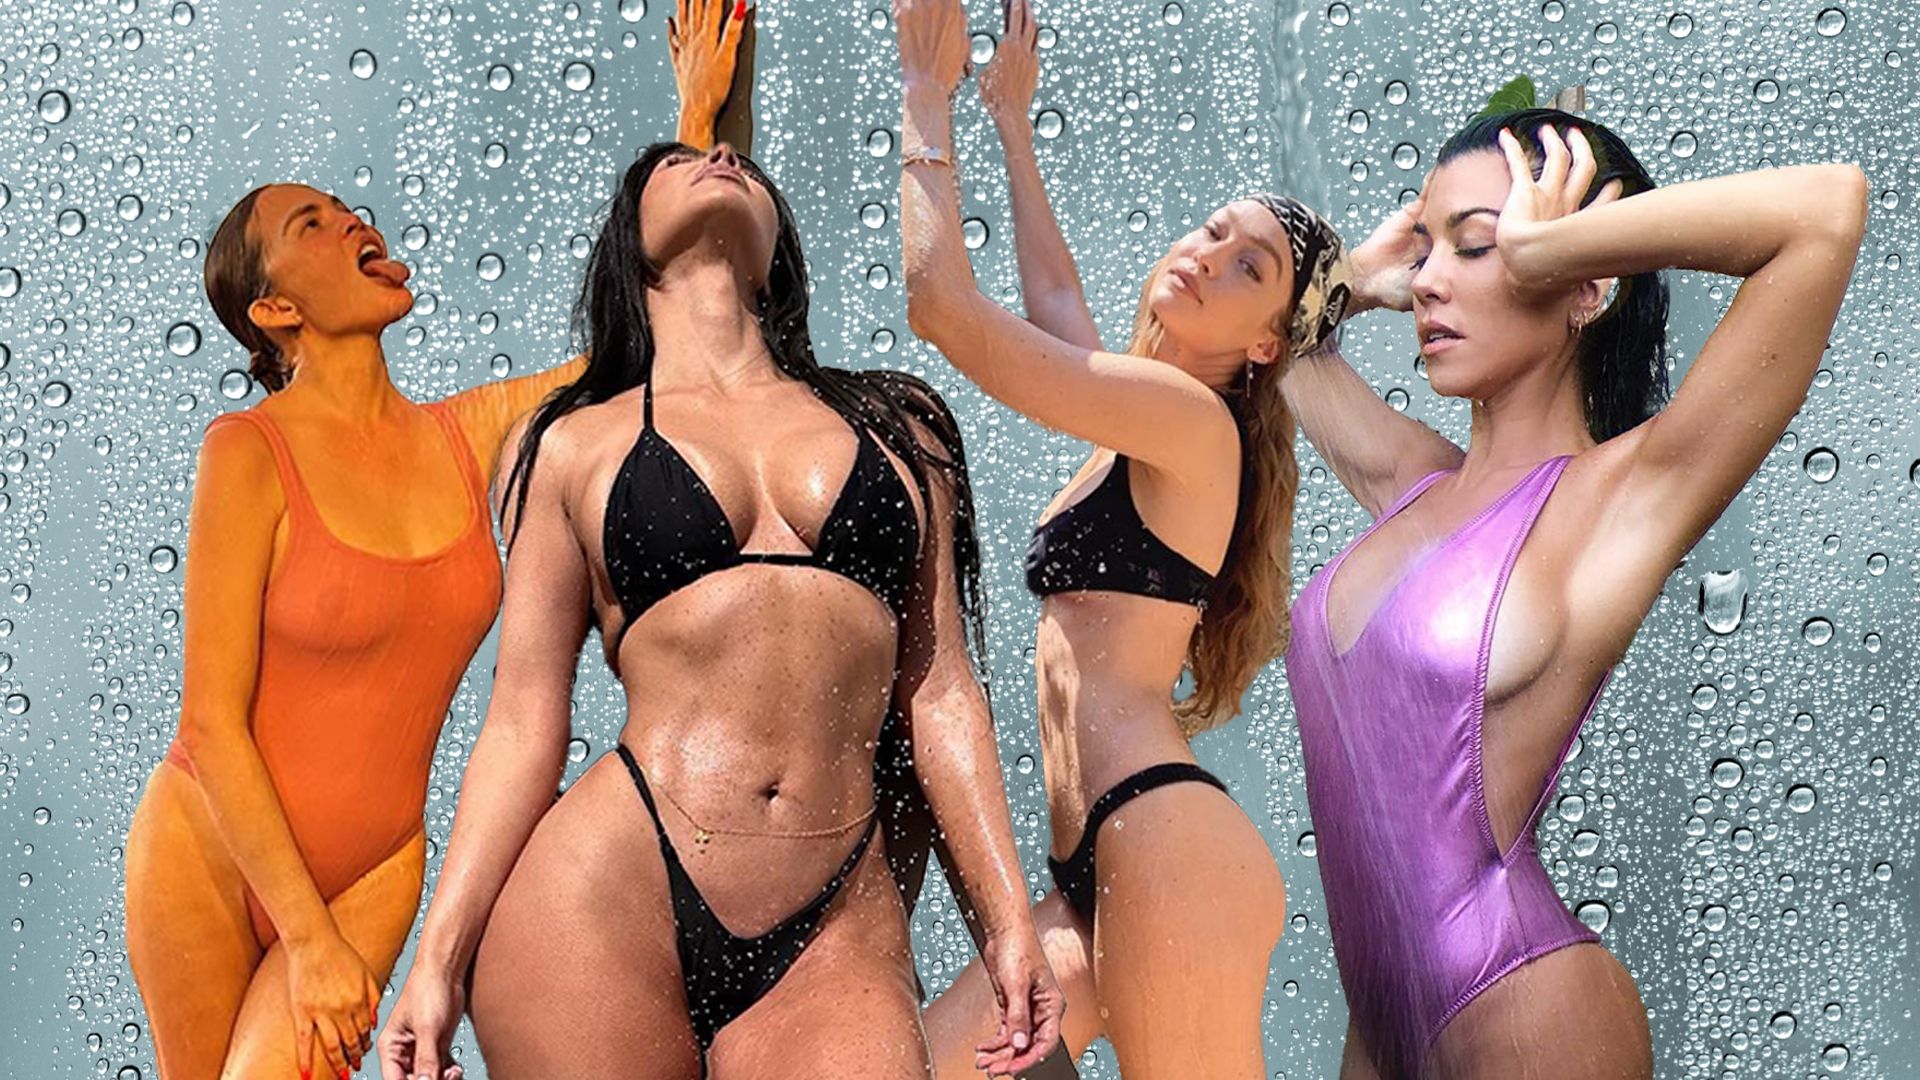 These 10 racy celeb shower photos will make you blush - guaranteed